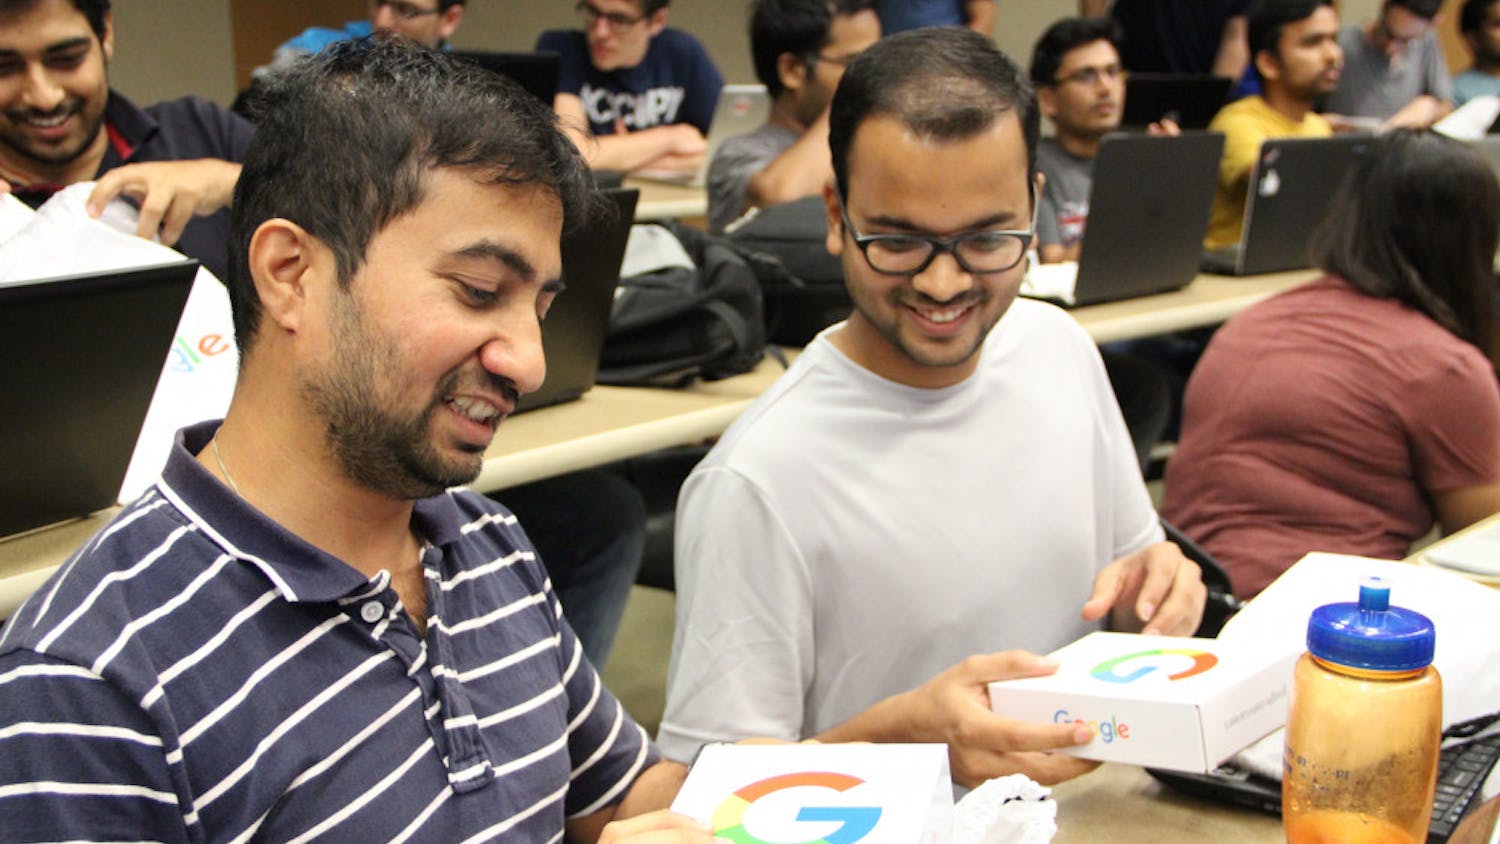 (From left to right) Master's computer science students, 35-year-old Pradeep Rajan and 25-year-old Harshit Vijayvargia, excitedly open goodie bags from Google. Rajan and Vijayvargia were some of the lucky few who ran up to get these bags.